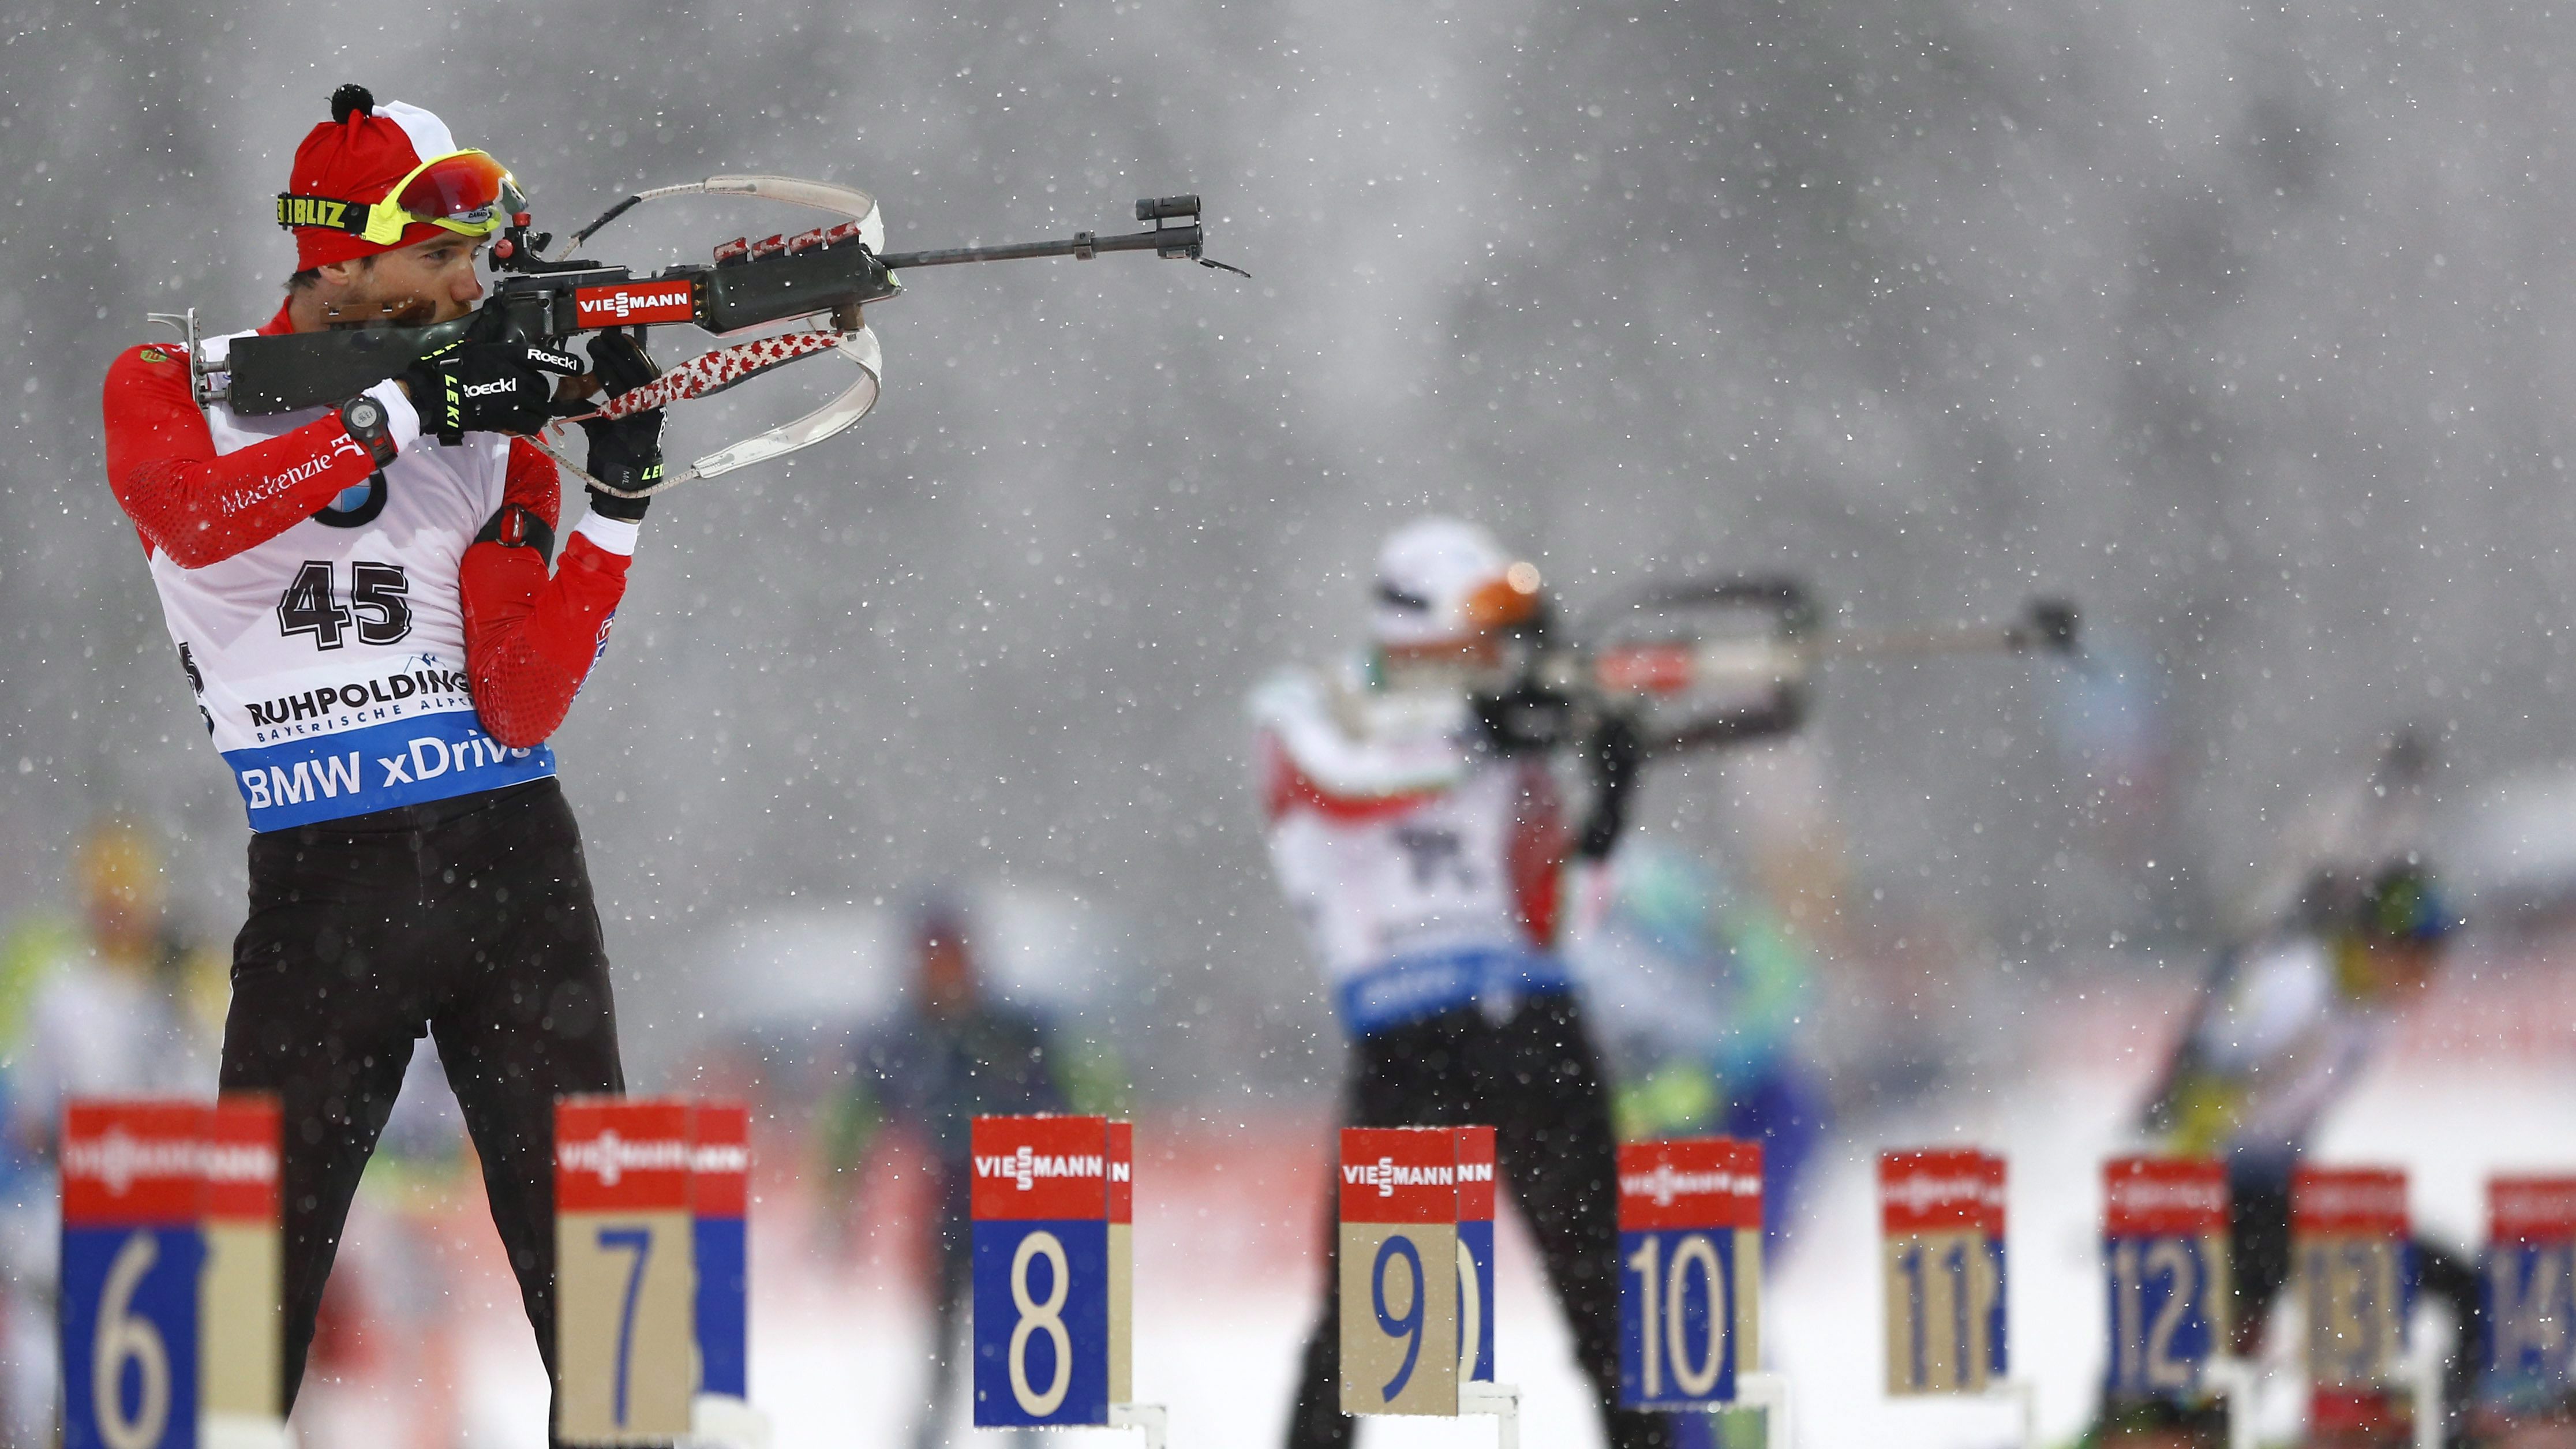 Canada's Nathan Smith shoots at the men's Individual 20 km competition at the Biathlon World Cup in Ruhpolding, Germany, Wednesday, Jan. 13, 2016. (AP Photo/Matthias Schrader)